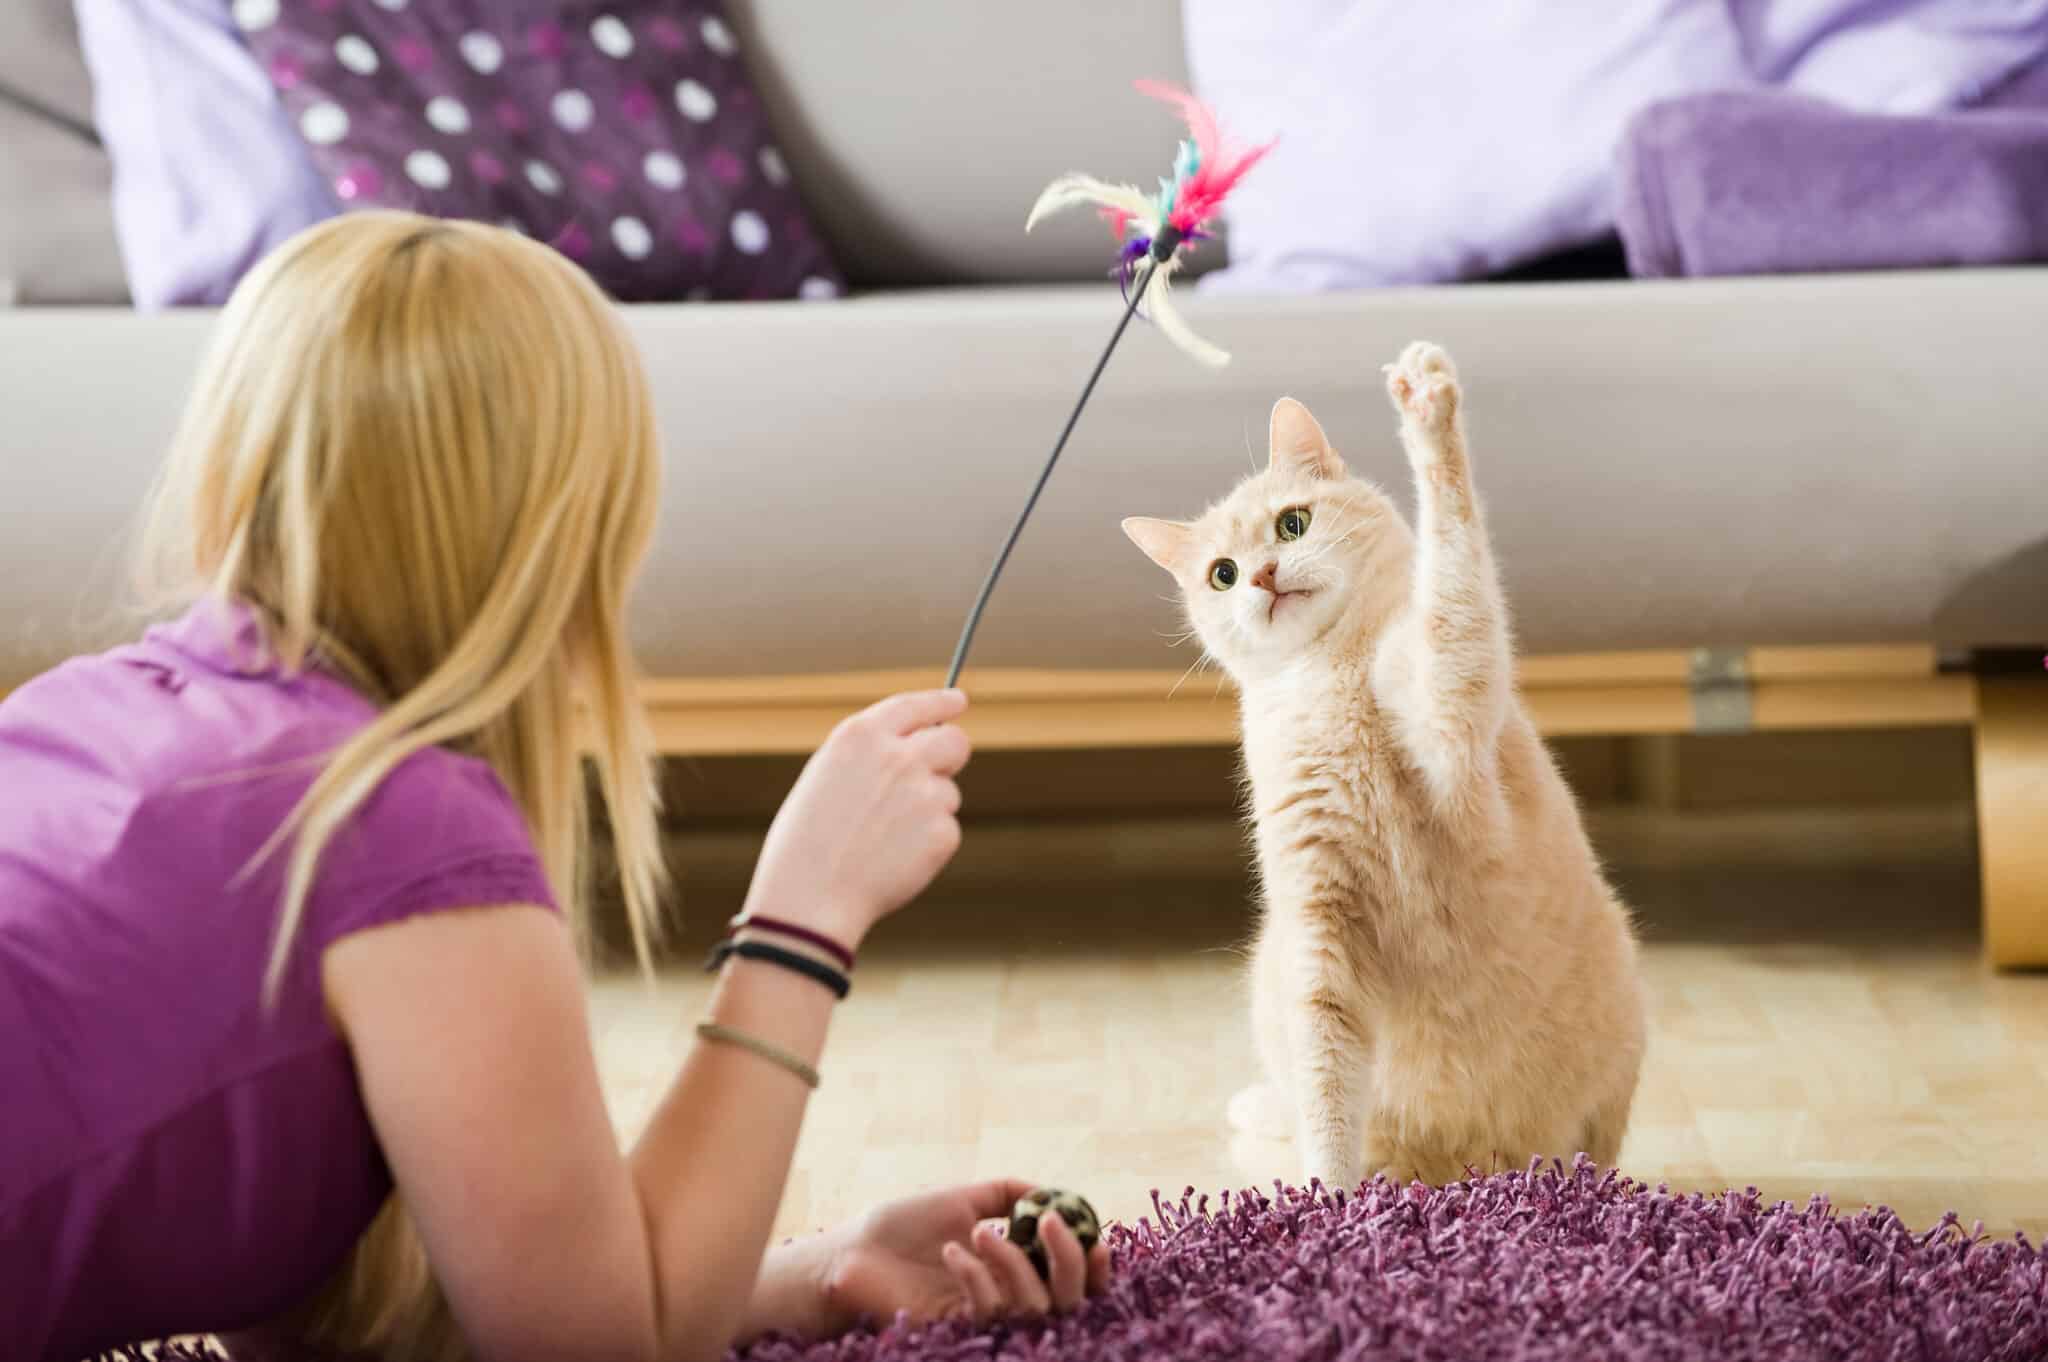 Girl playing with cat using a feather wand.